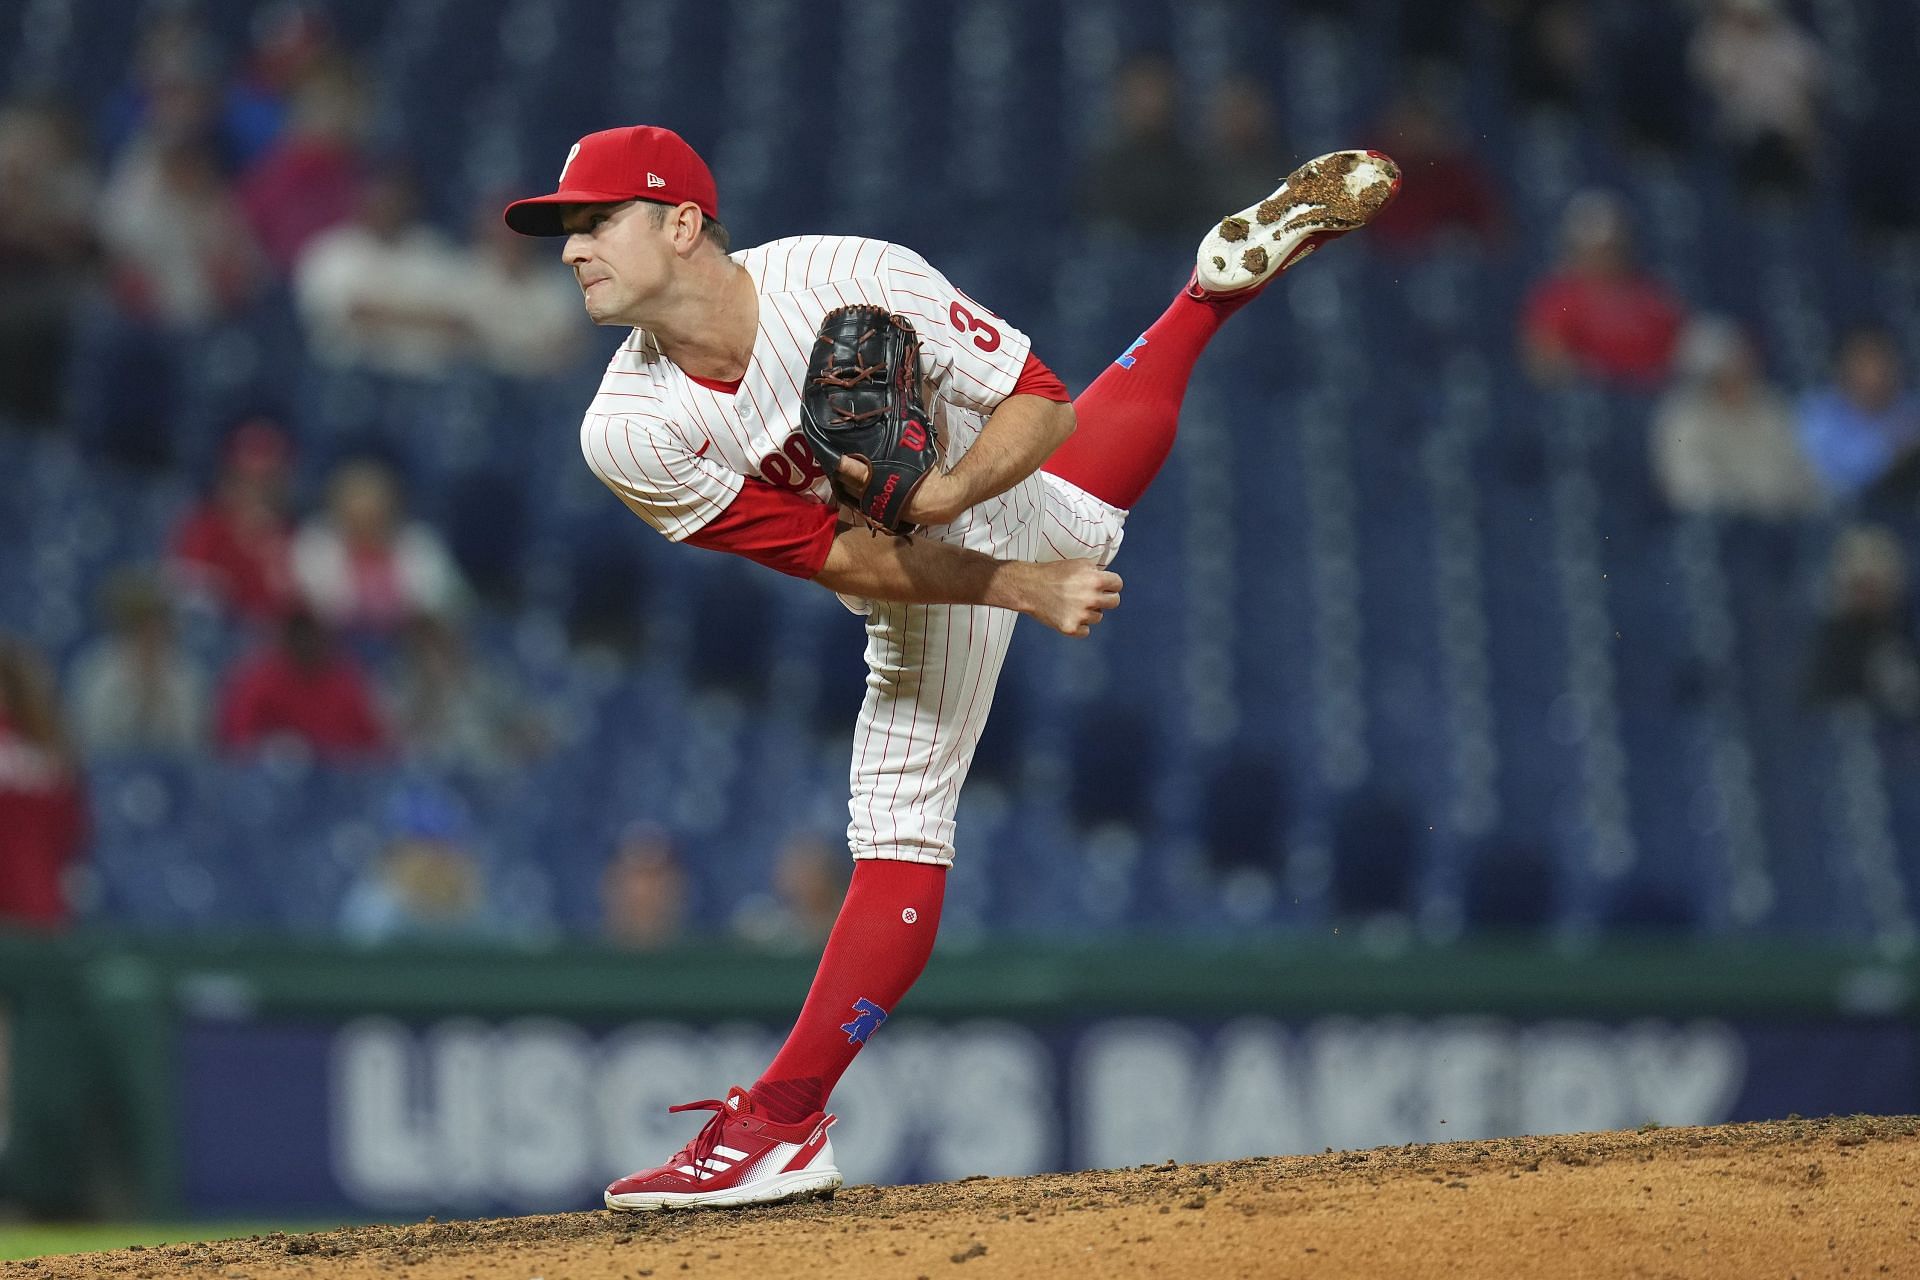 Phillies' David Robertson Out for Series With Injury From